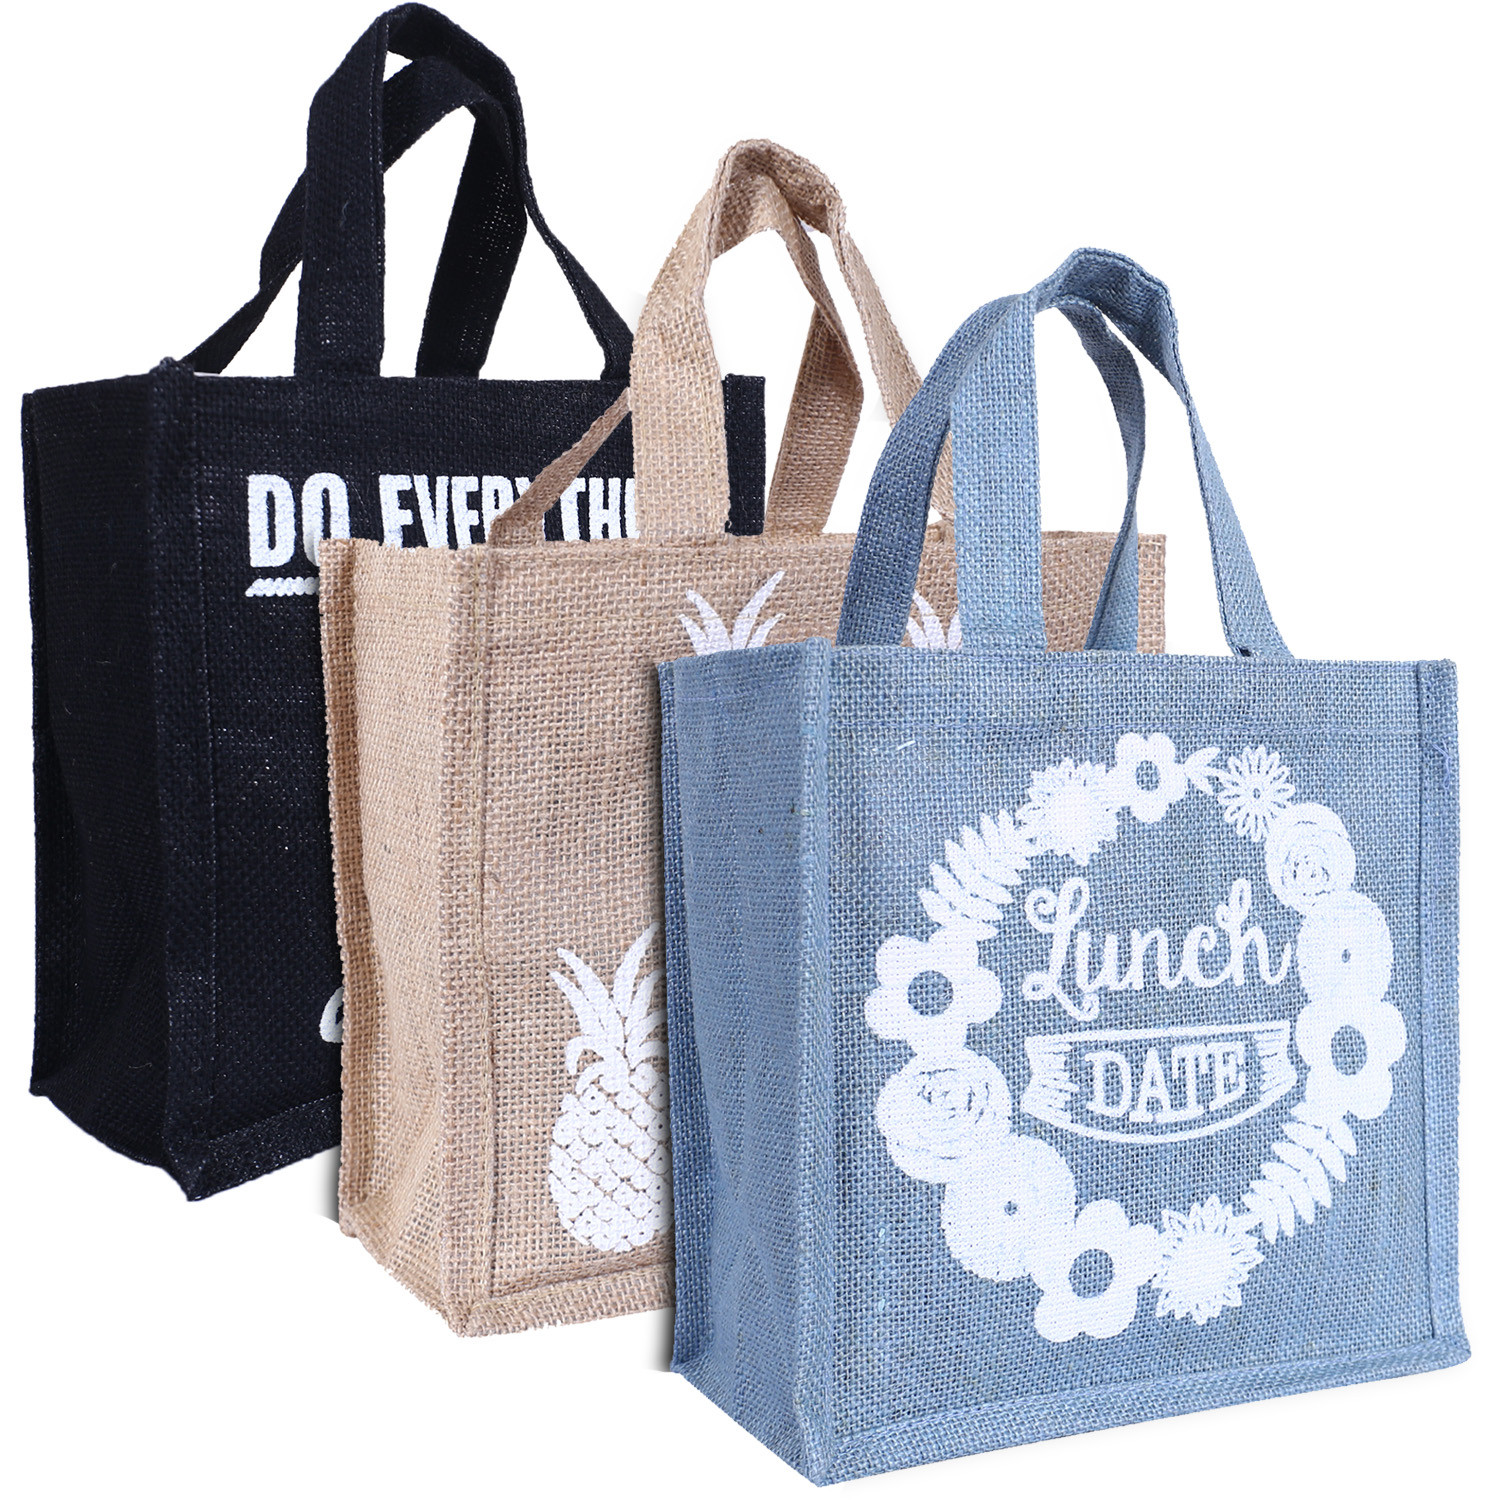 Kuber Industries Lunch Bag|Reusable Jute Fabric Tote Bag|Durable & Attractive Print Tiffin Carry Hand bag with Handle For office,School,Gift,Pack of 3 (Multicolor)